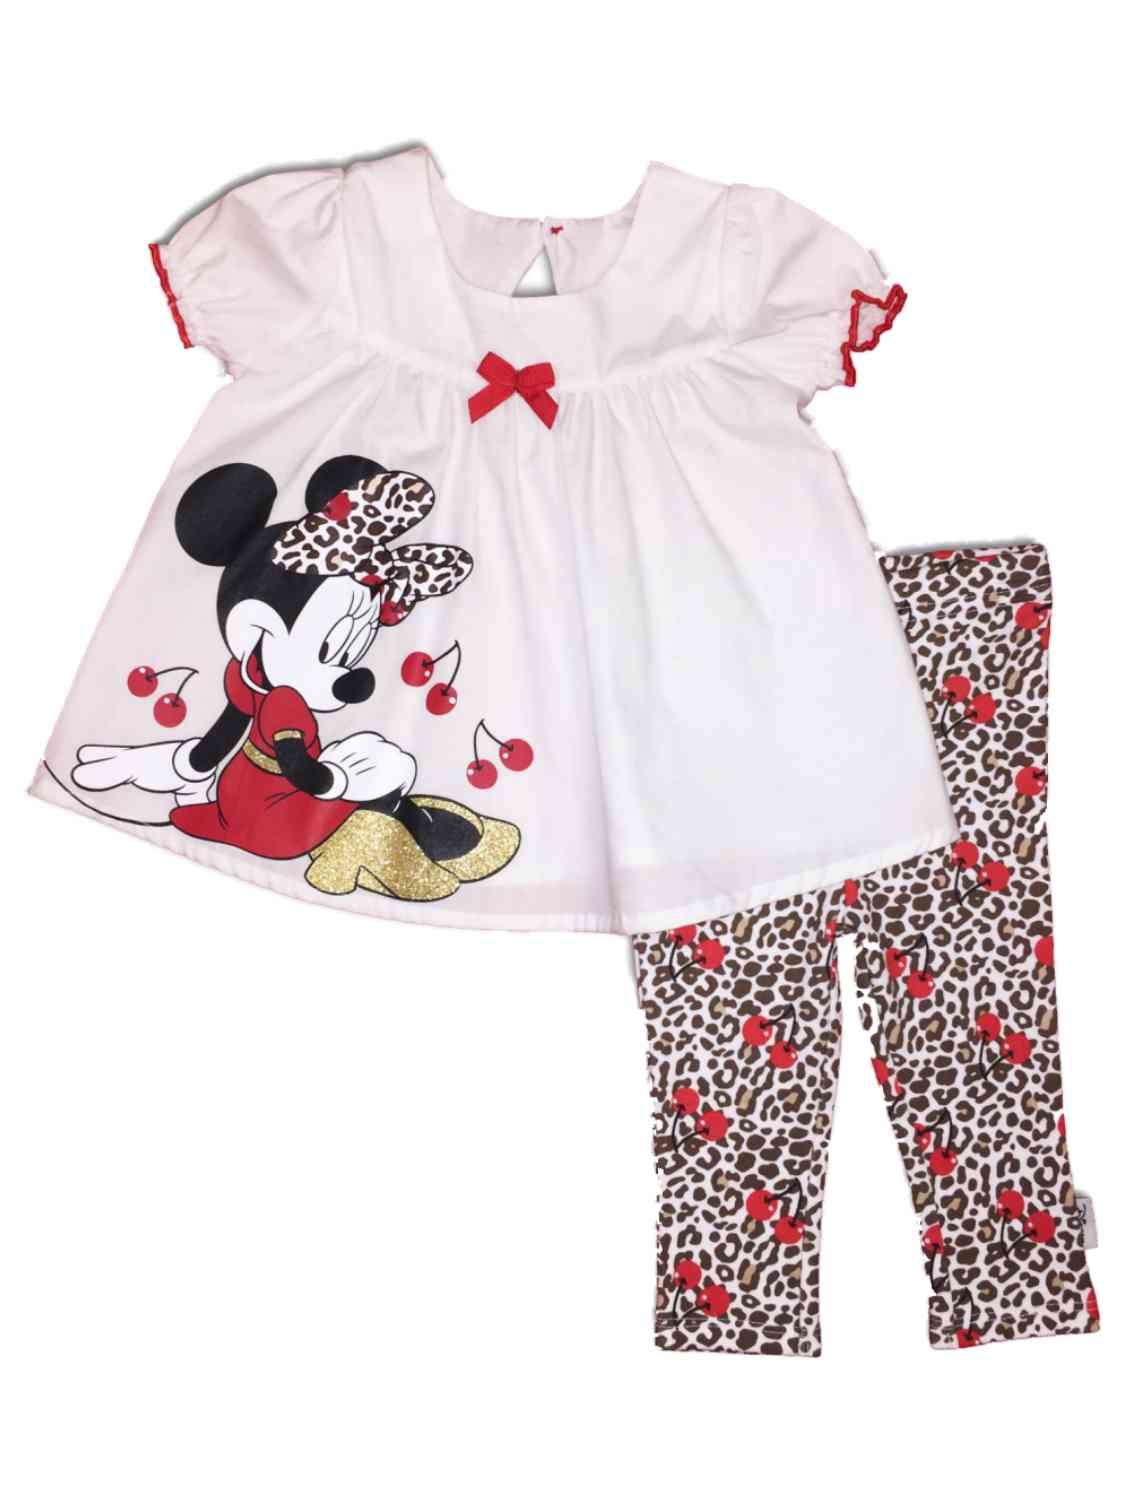 Disney Infant Girls Minnie Mouse Baby Outfit Cherry Shirt & Leopard Pants